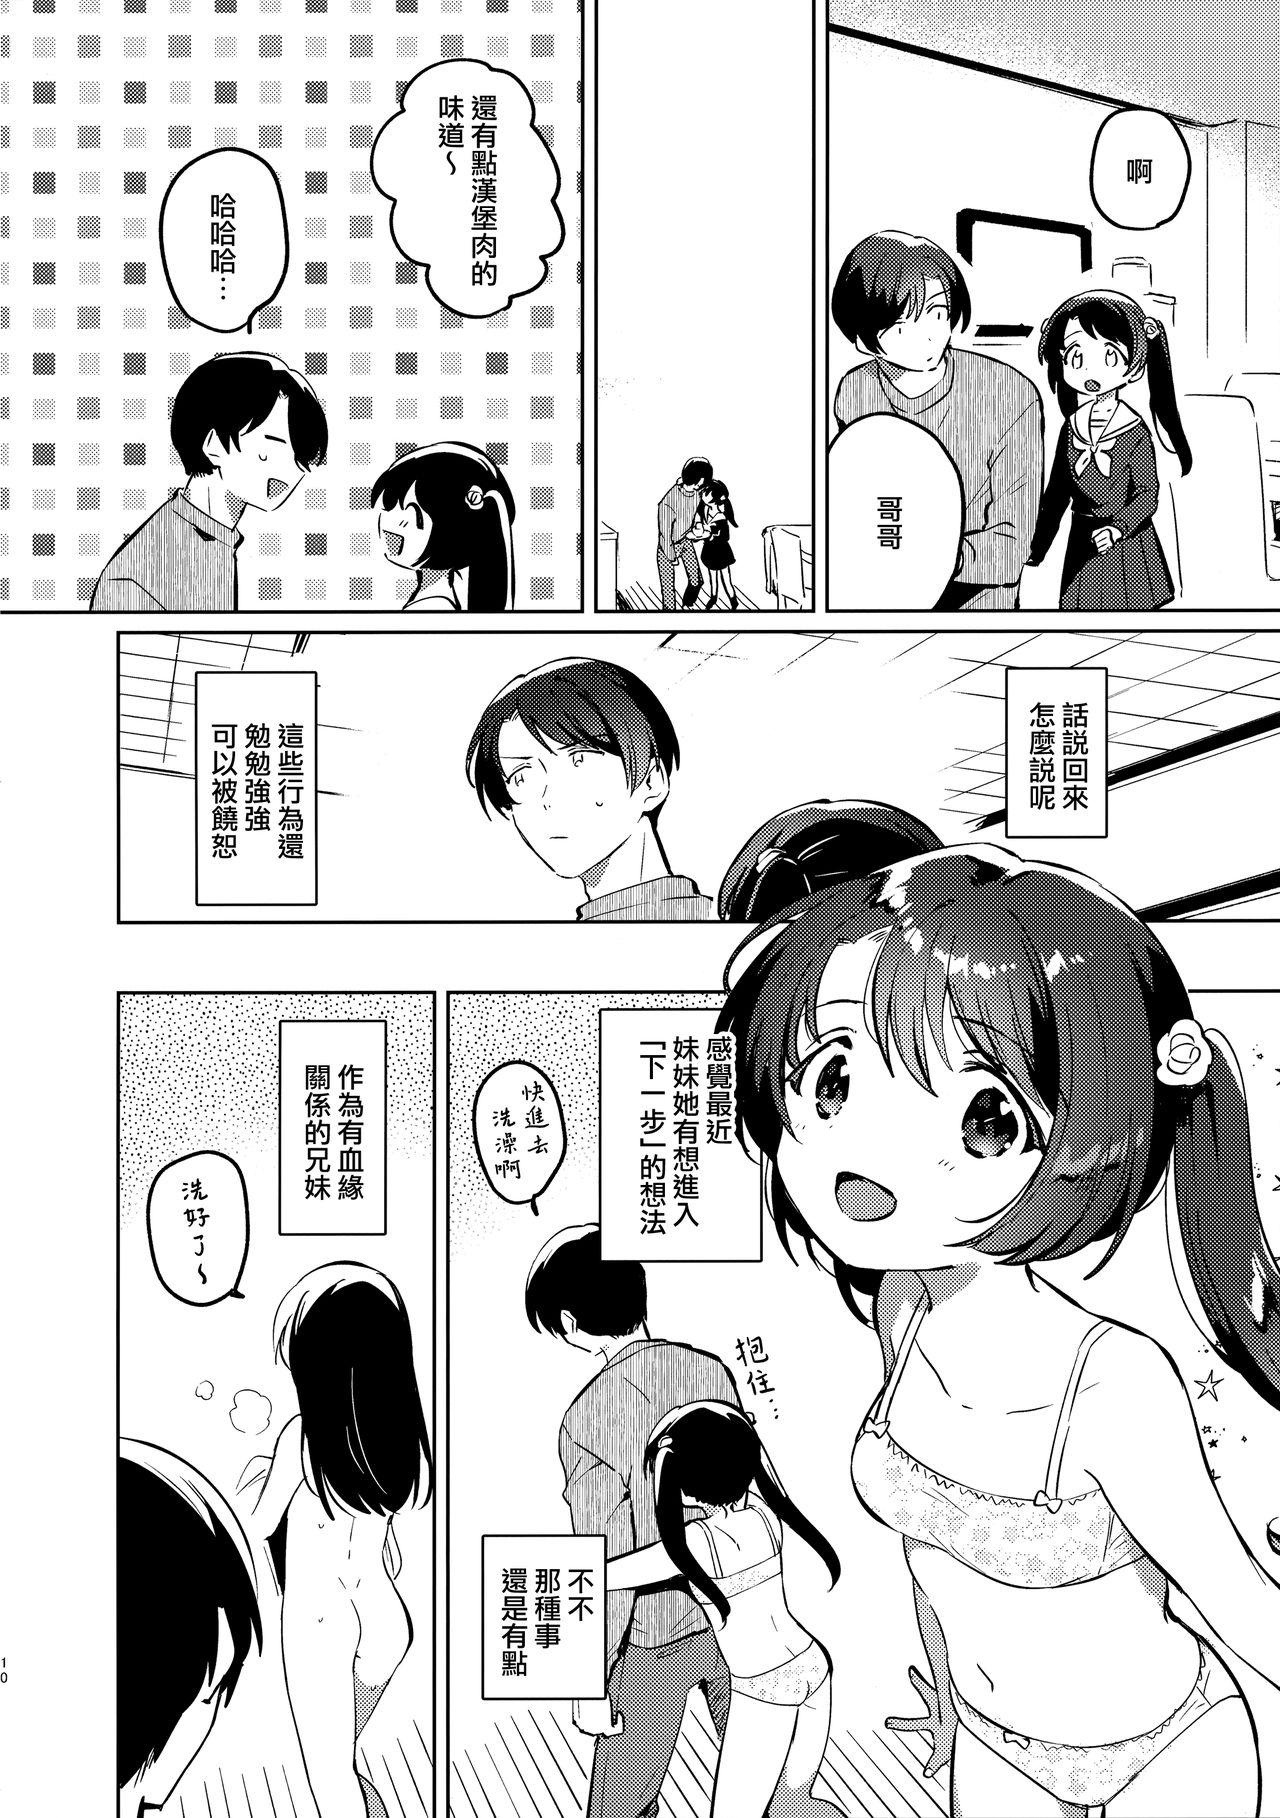 Nudity Imouto to Lockdown - Original Gay Cut - Page 10